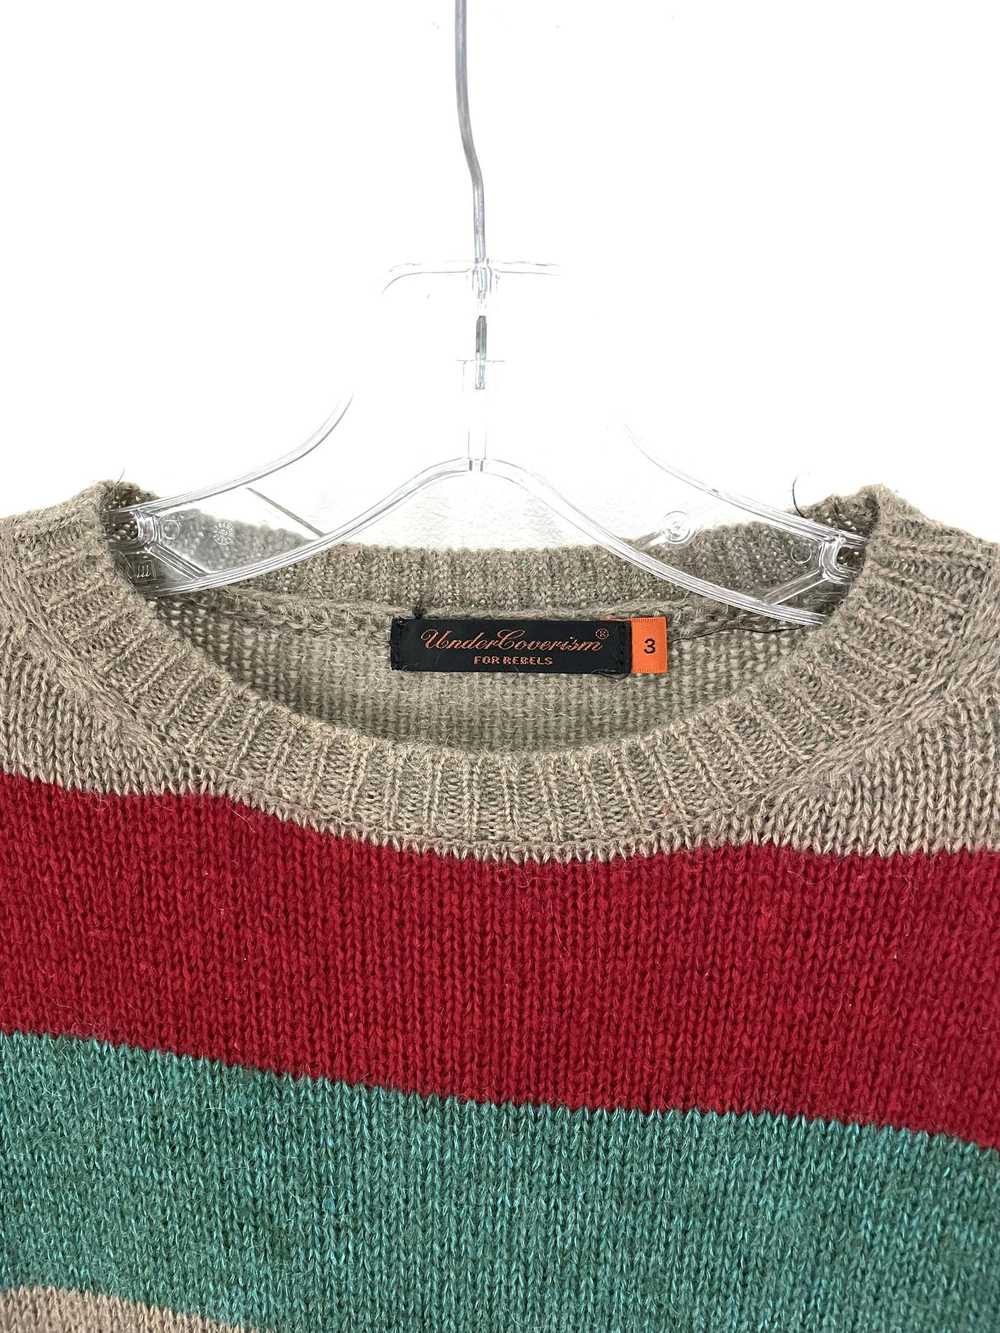 Undercover AW05 Arts & Crafts Mohair Sweater - image 3